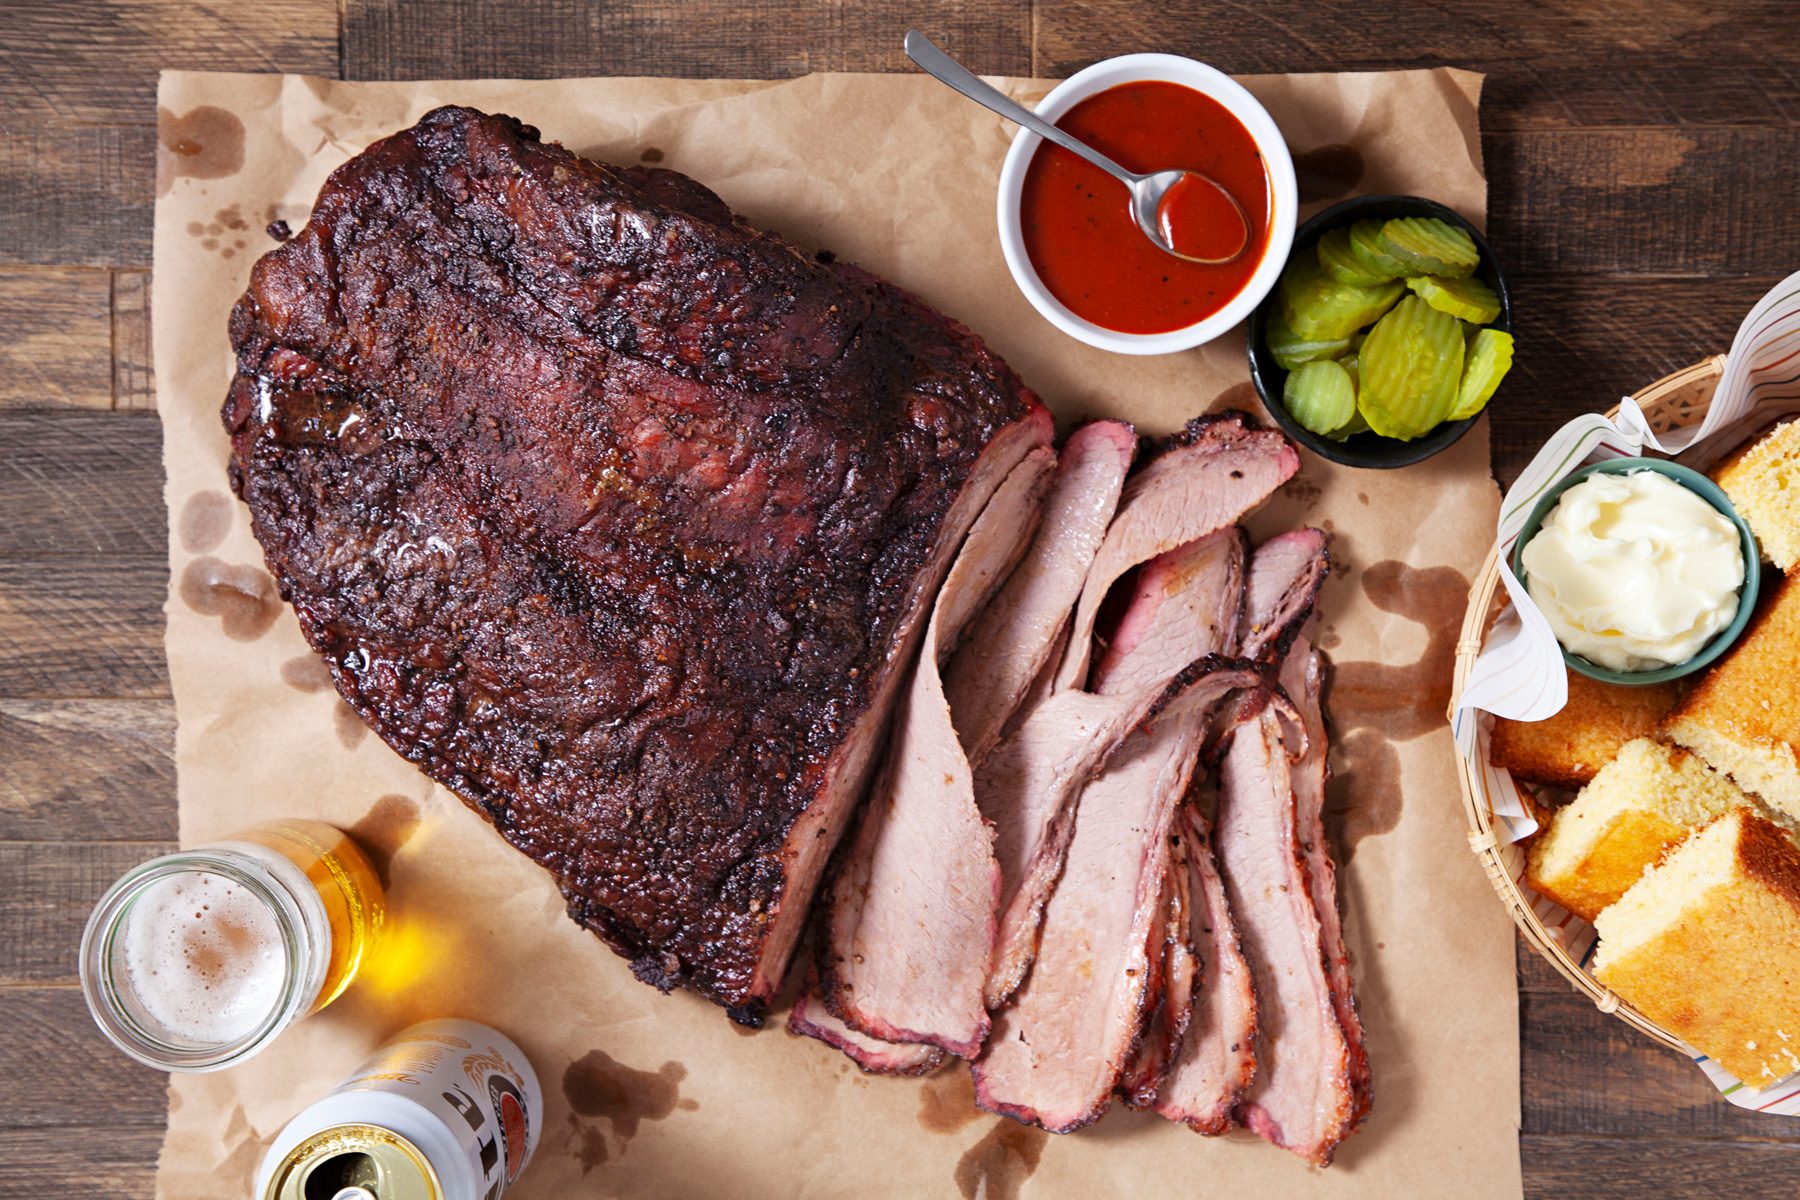 Sliced smoked brisket with sauce on a table.